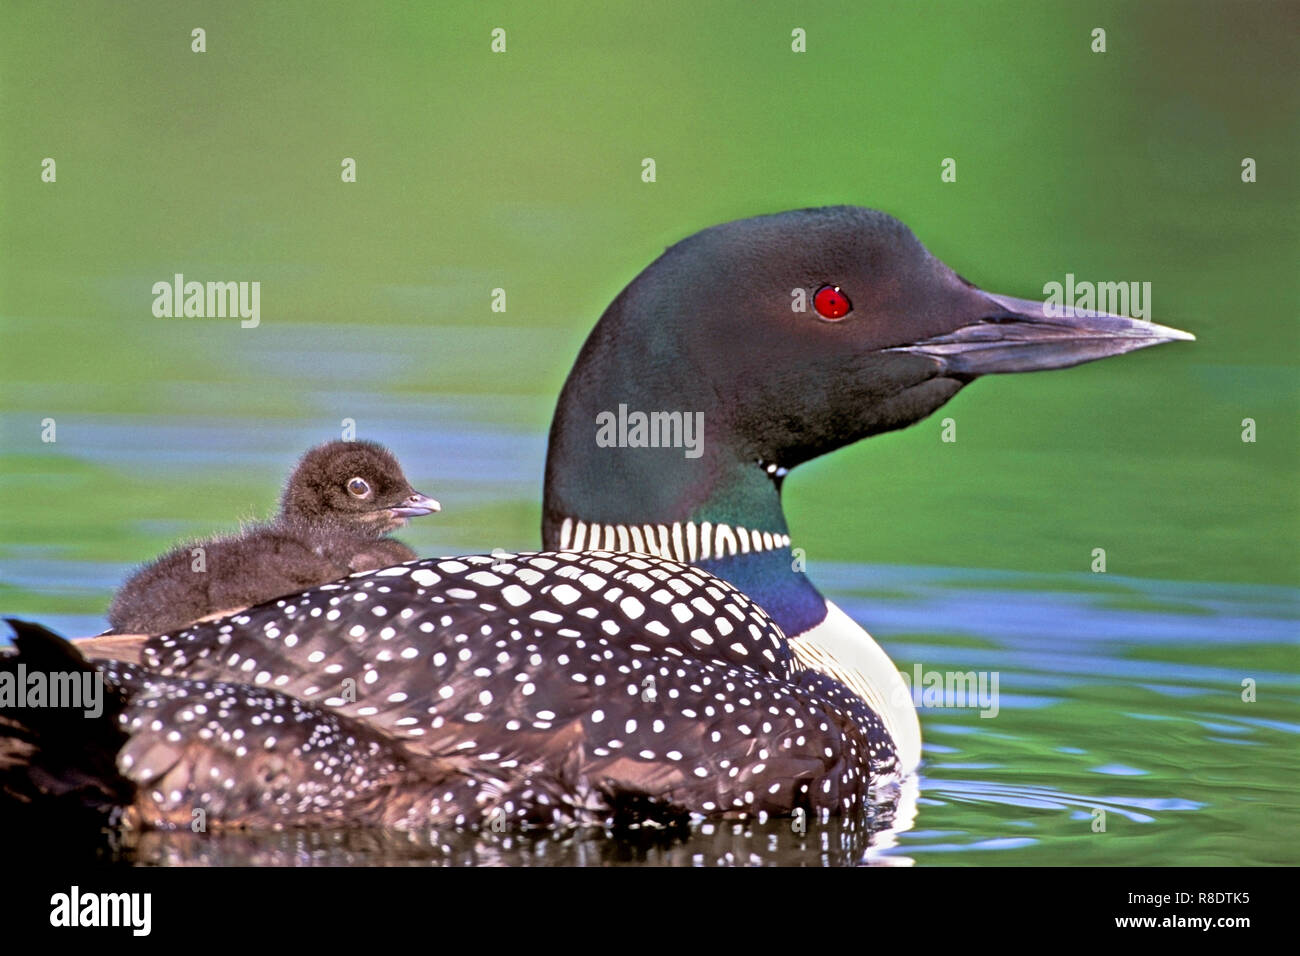 Common Loon or Great Northern Diver with chick on back swimming in lake Stock Photo